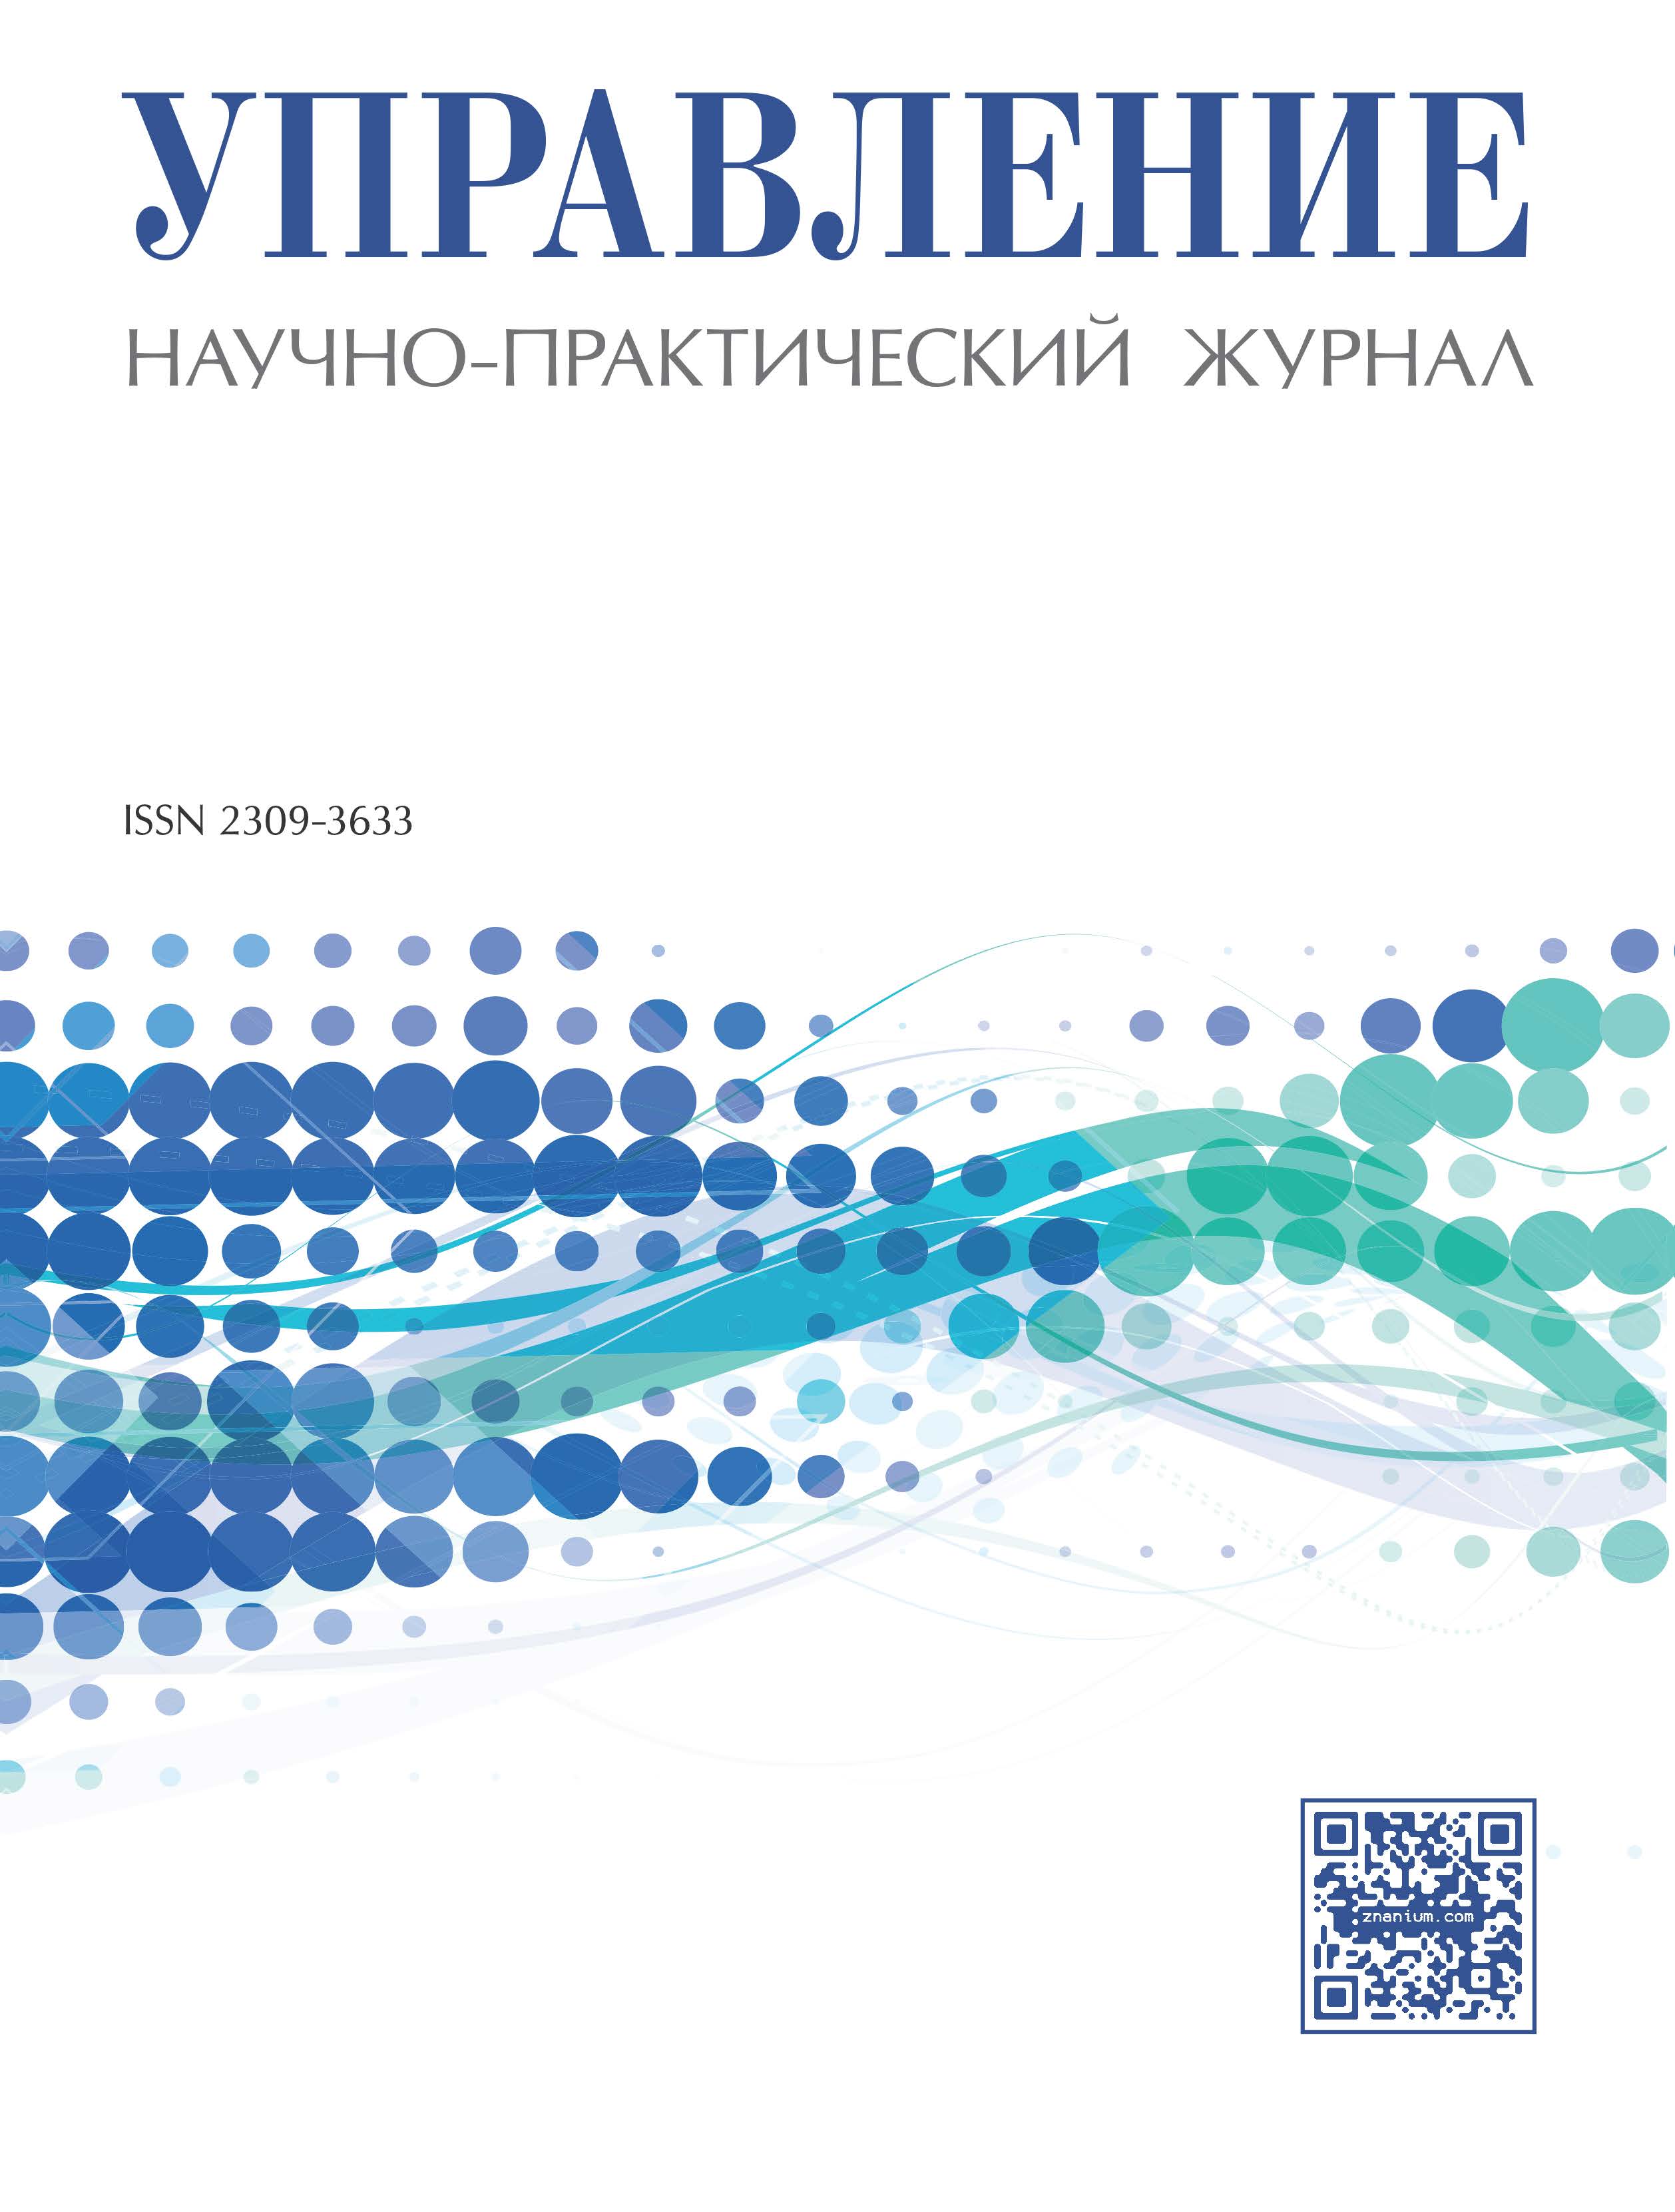                         Evolution of Nongovernmental Pension Funds in Russia
            